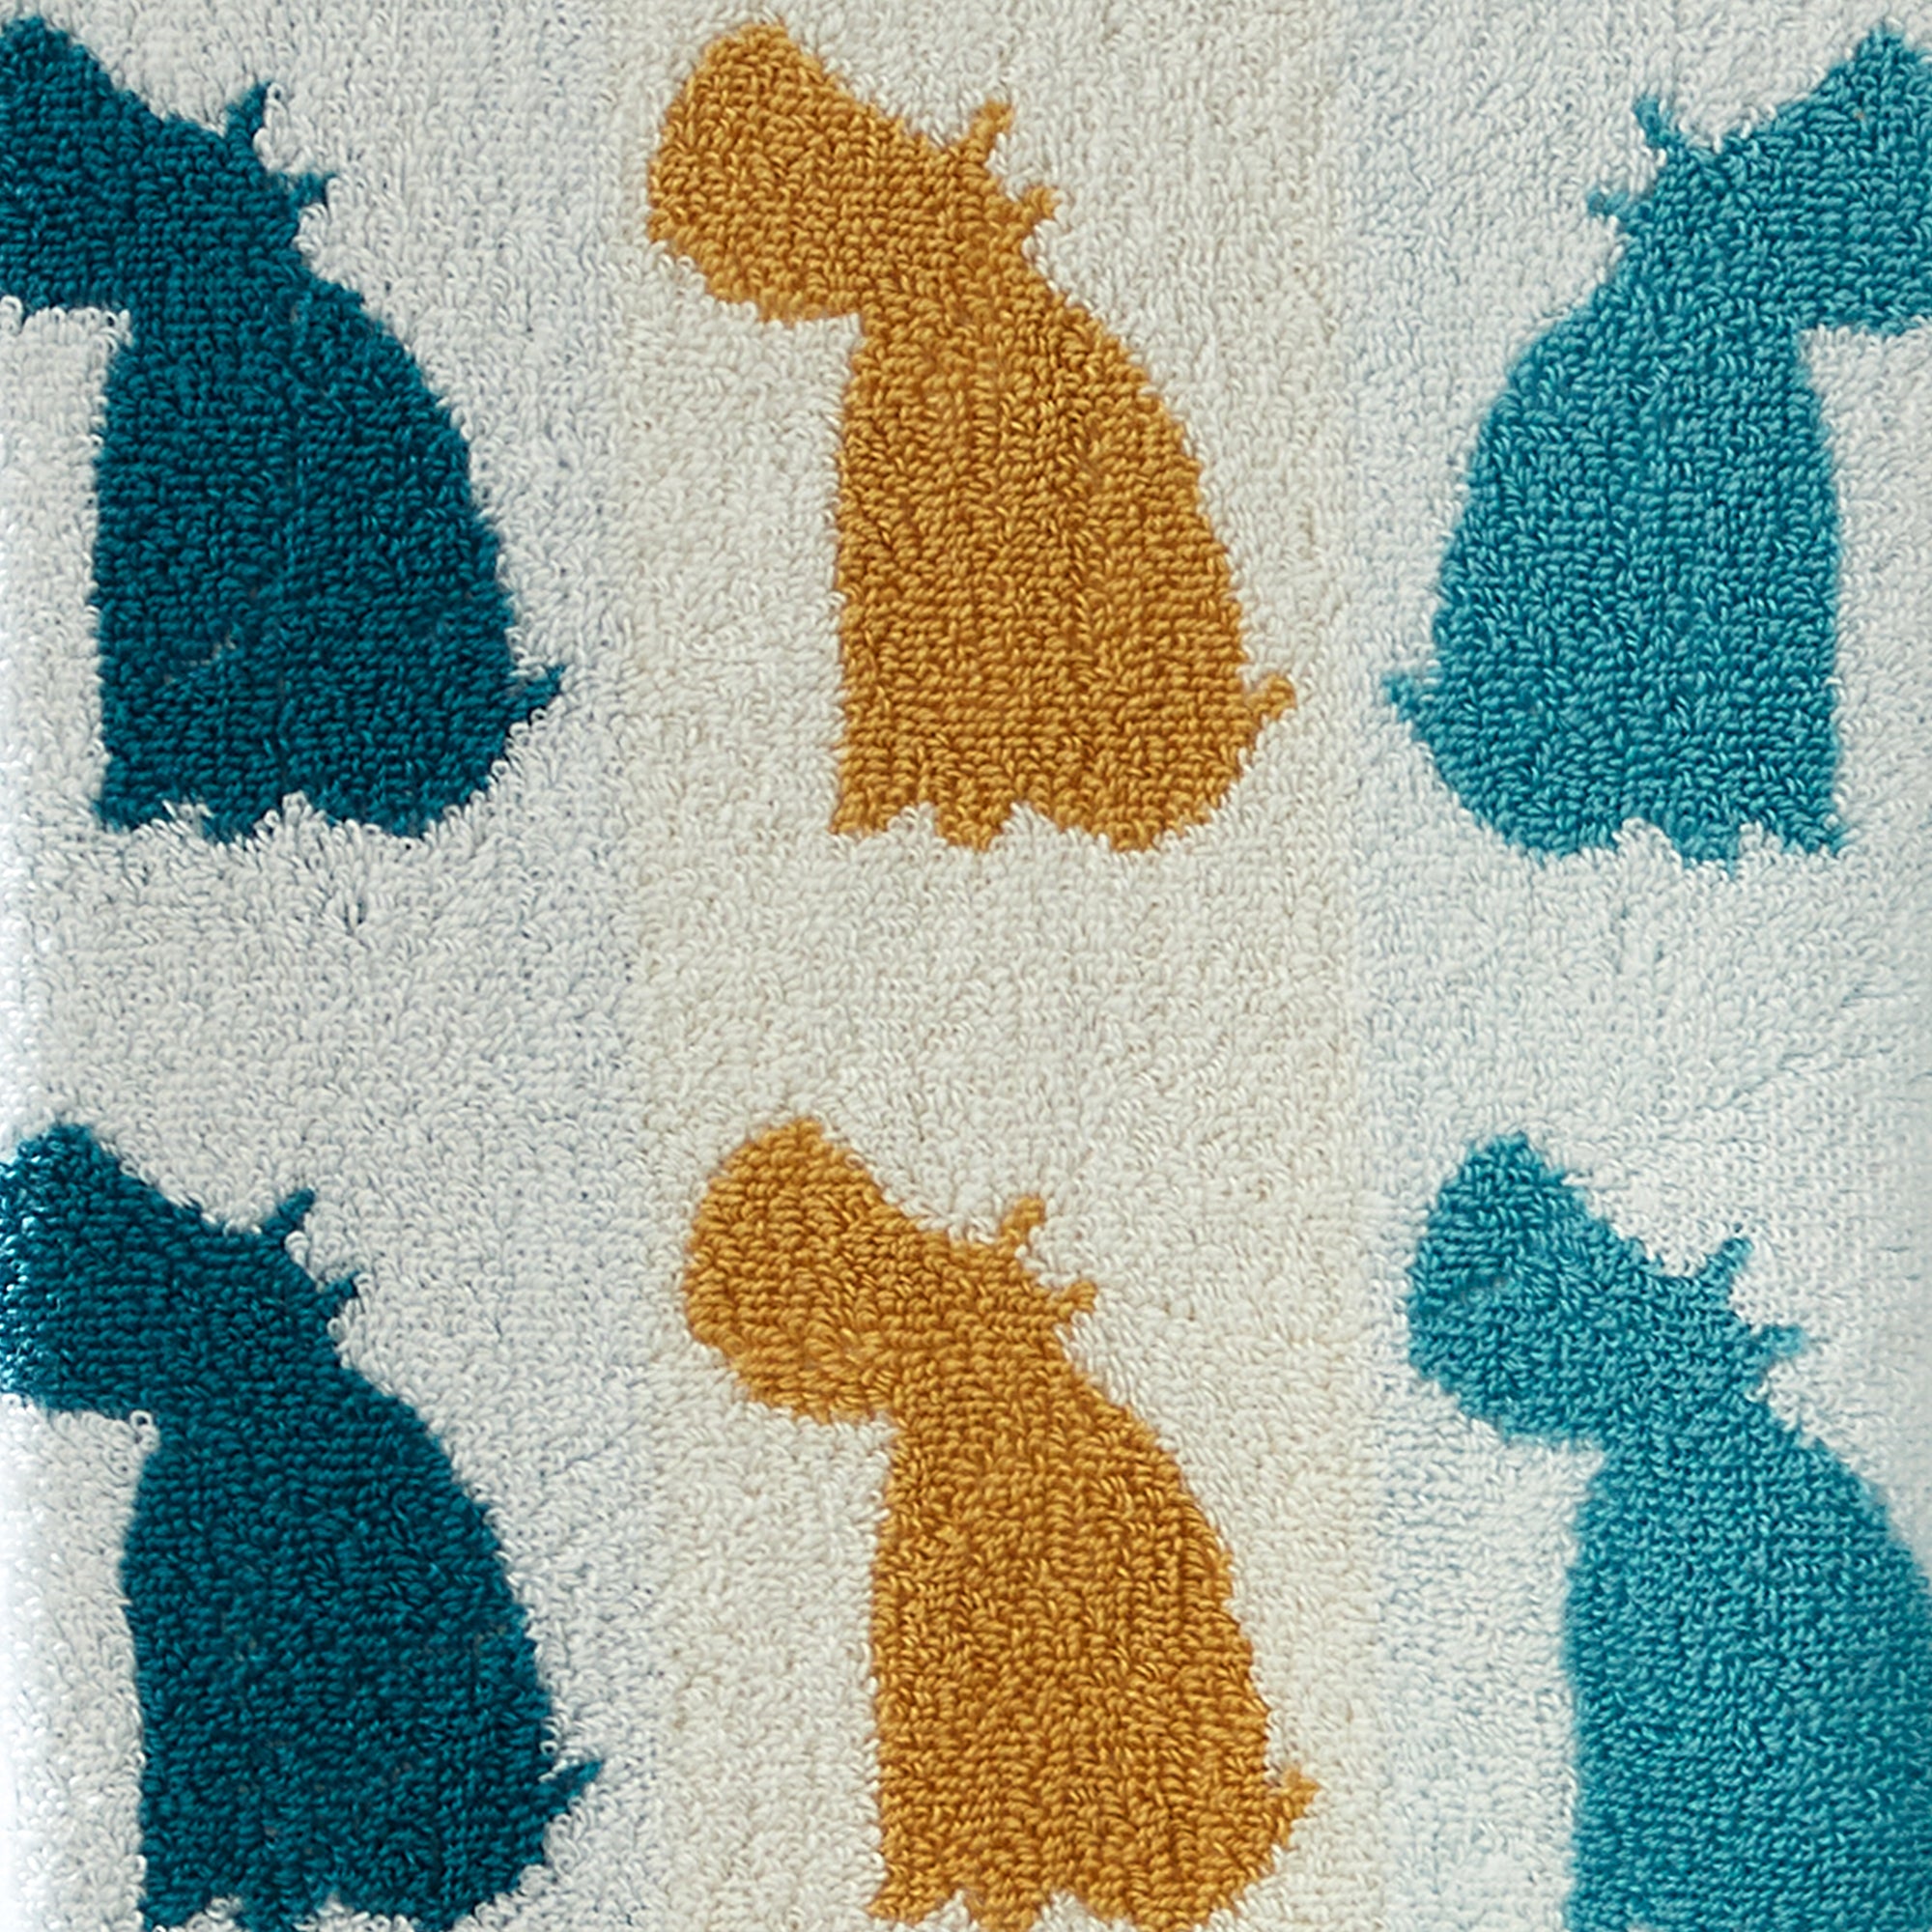 Hand Towel Hippo by Fusion Bathroom in Multi